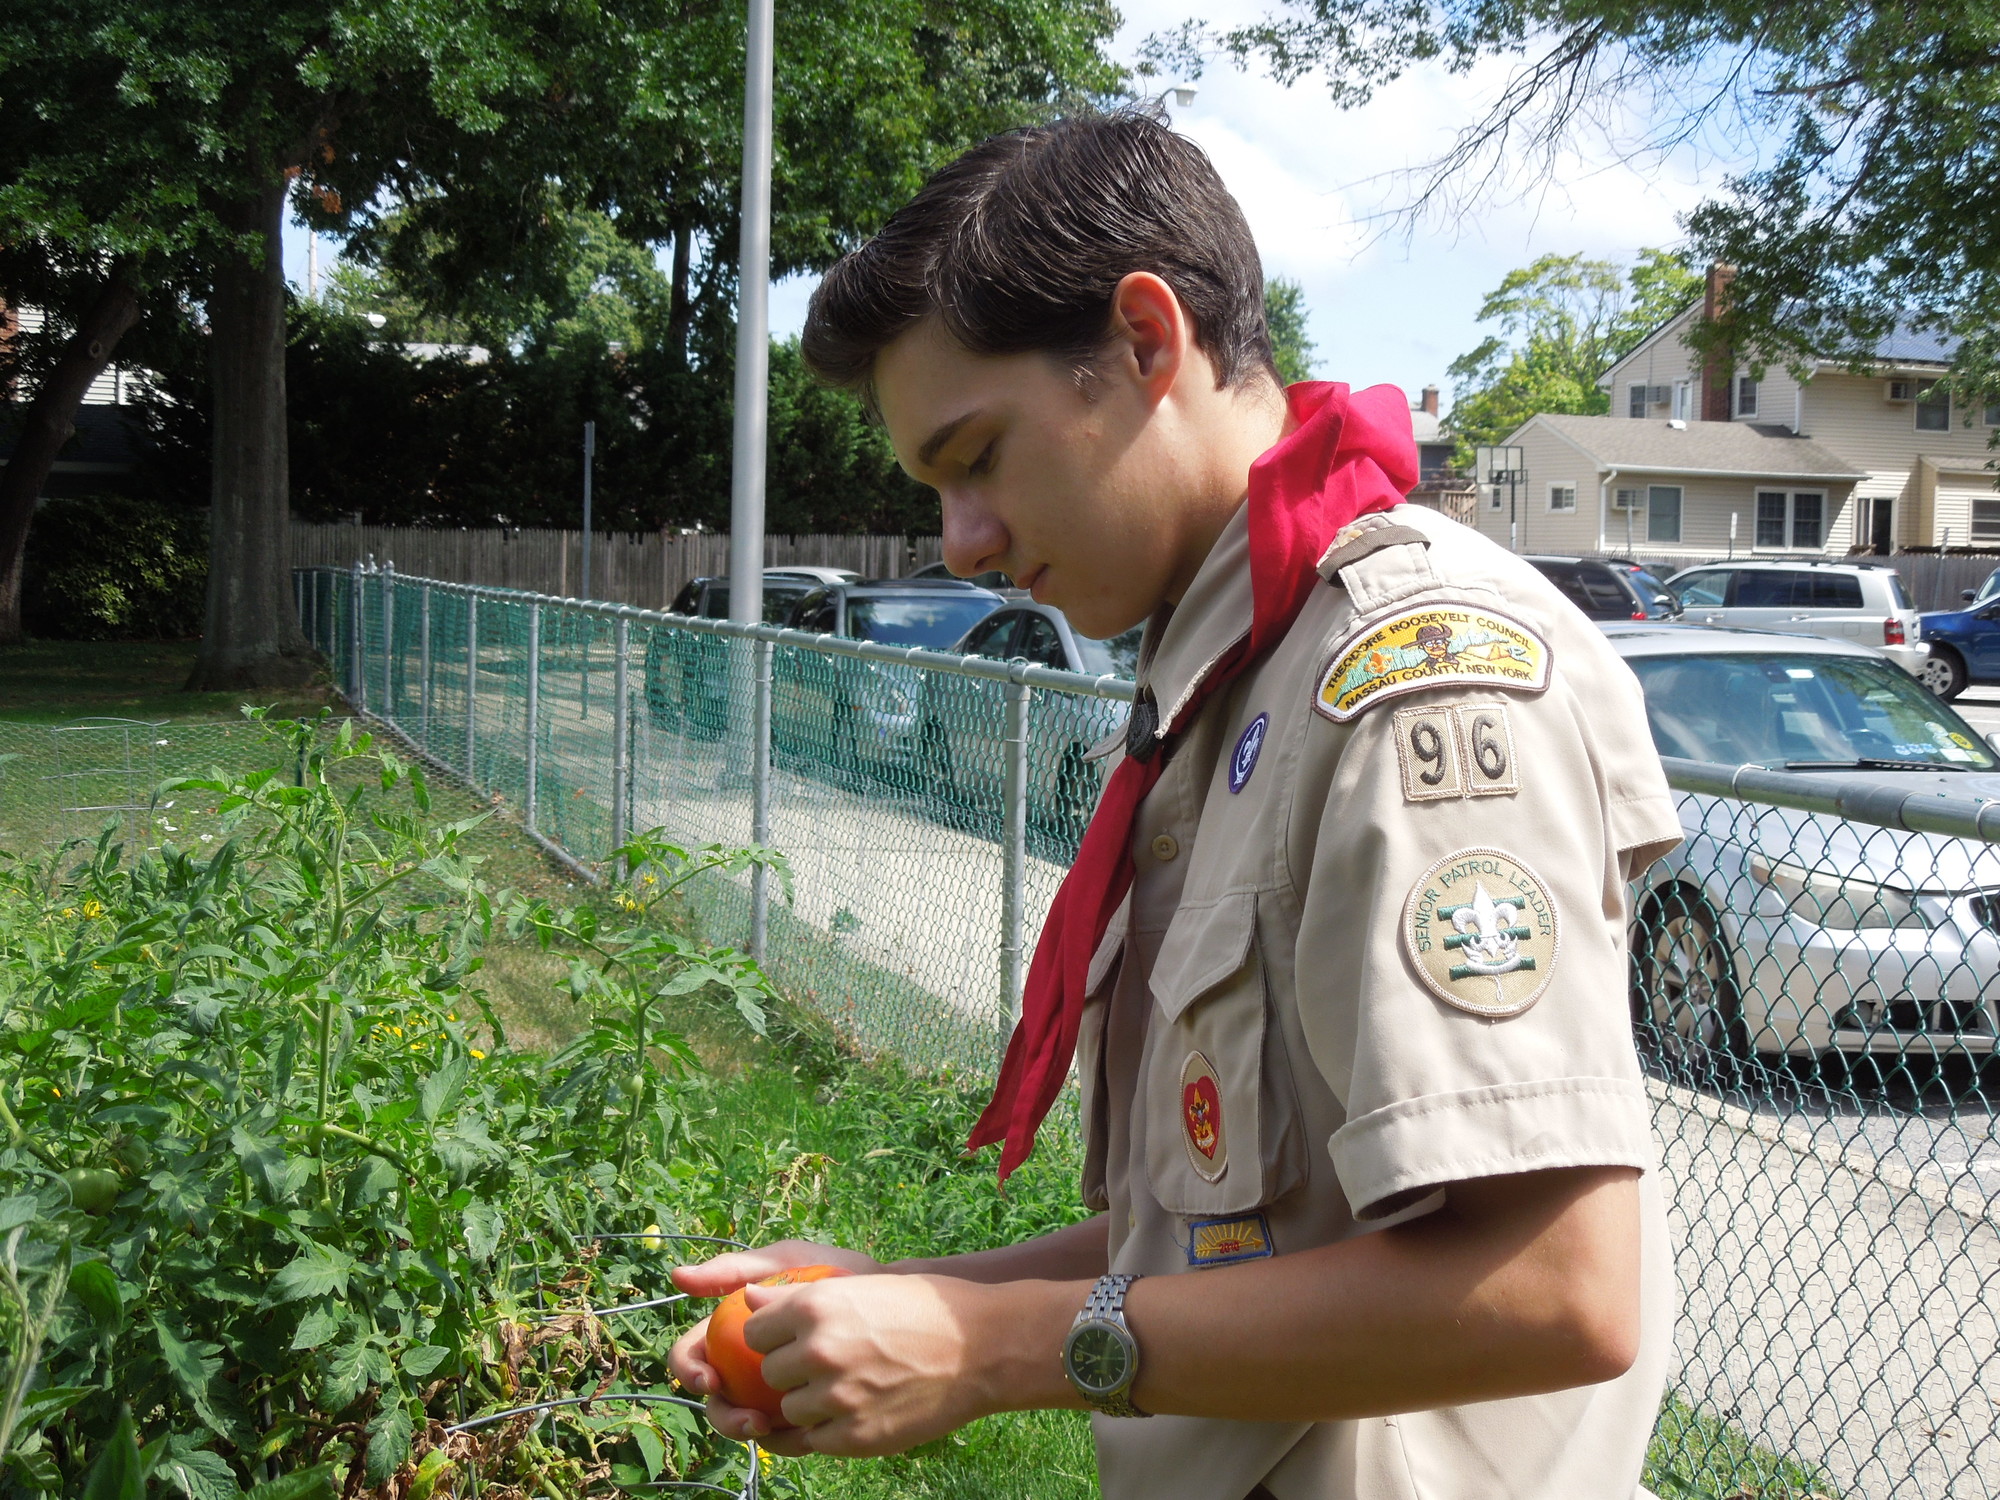 Eagle Scout Brian Howe has been maintaining the Giving Garden at the Wantagh Memorial Congregational Church, which provides fresh food for the hungry.